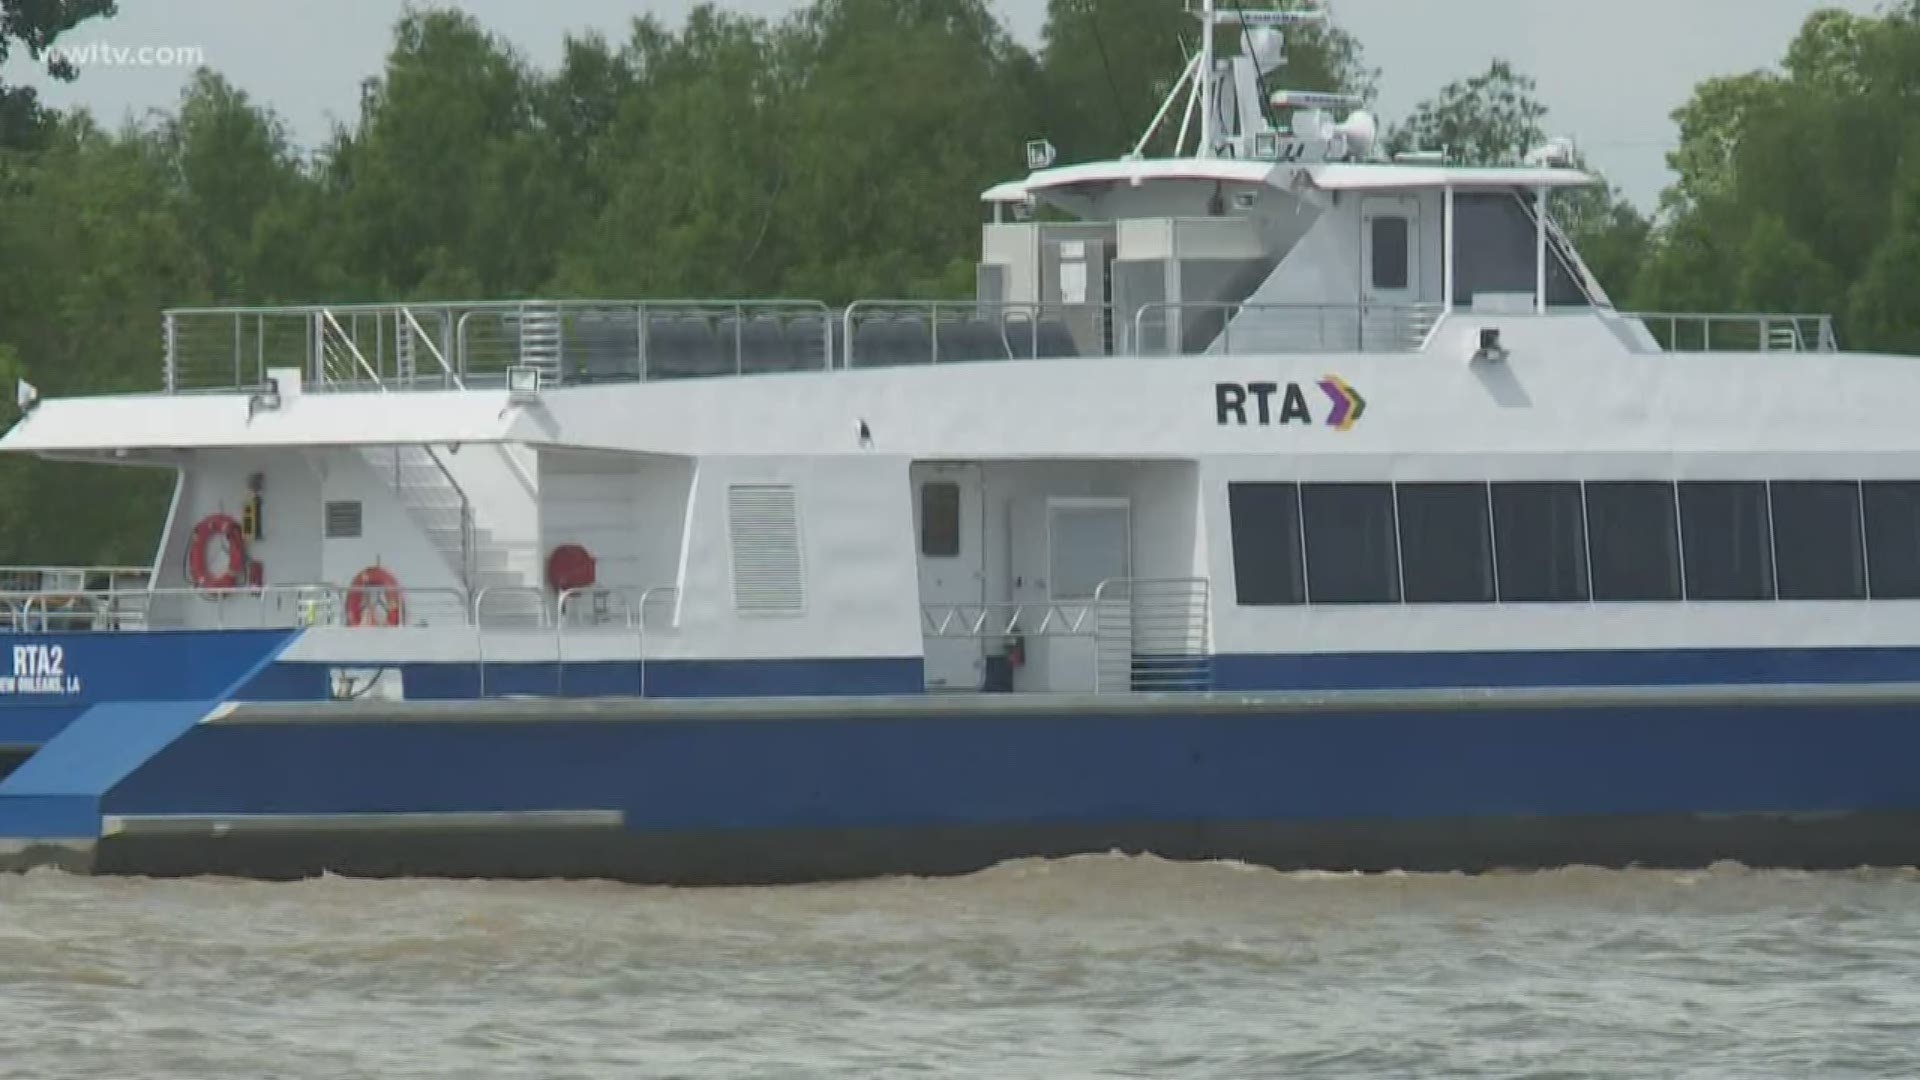 Questions arise around two brand new ferries that have not gone into service after a year of being in the city.